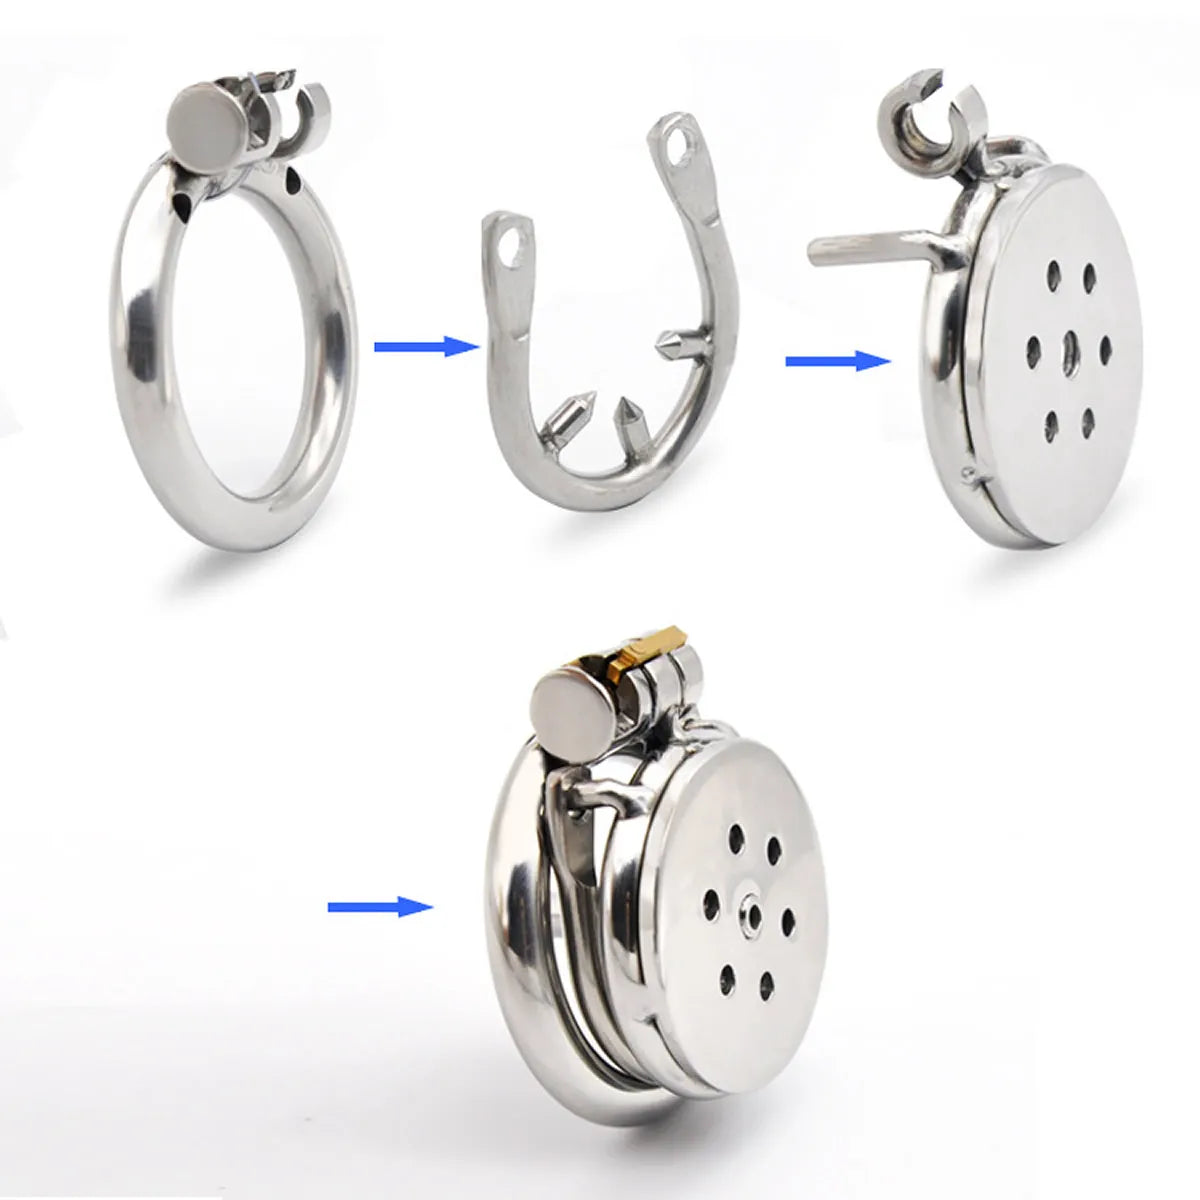 Male Slave Super Mini Chastity Cage Stainless Steel Penis Cage Cock Ring With Lock